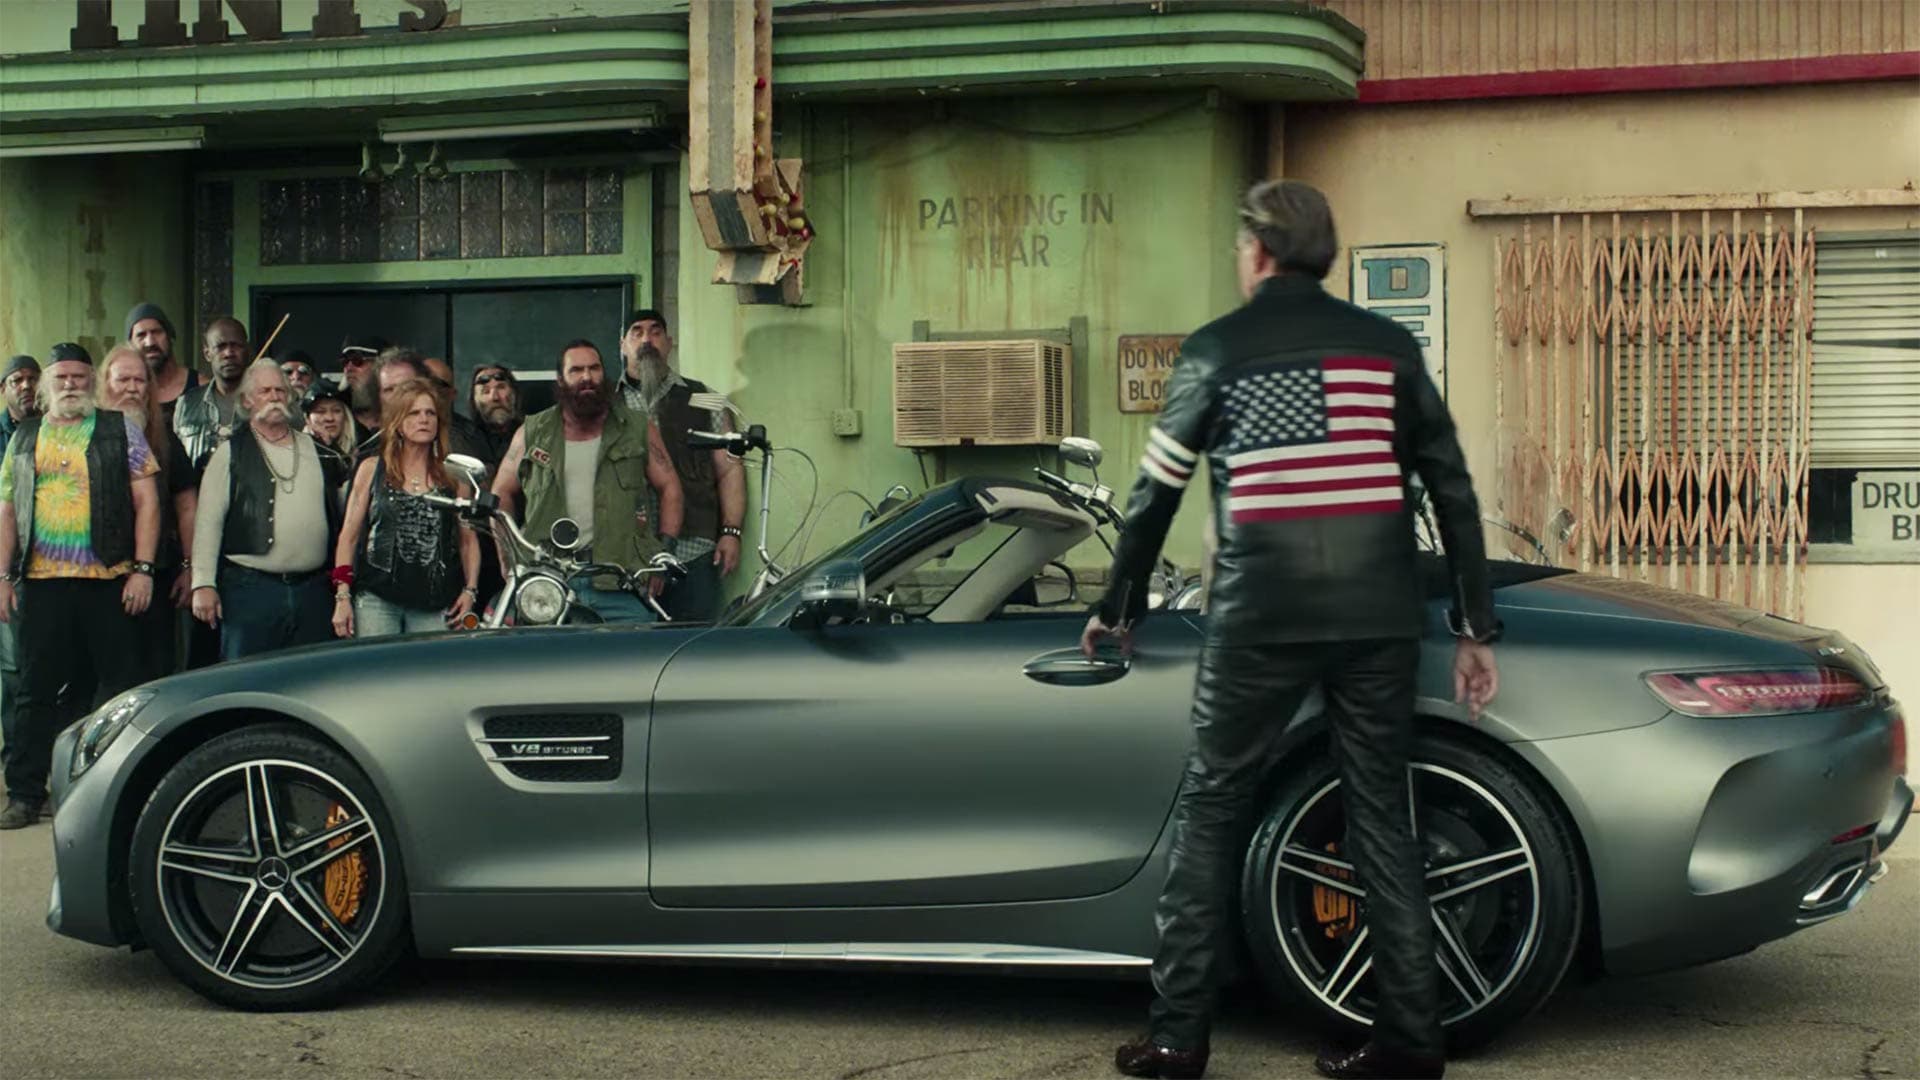 Mercedes-AMG Previews AMG GT Super Bowl Commercial Featuring Peter Fonda